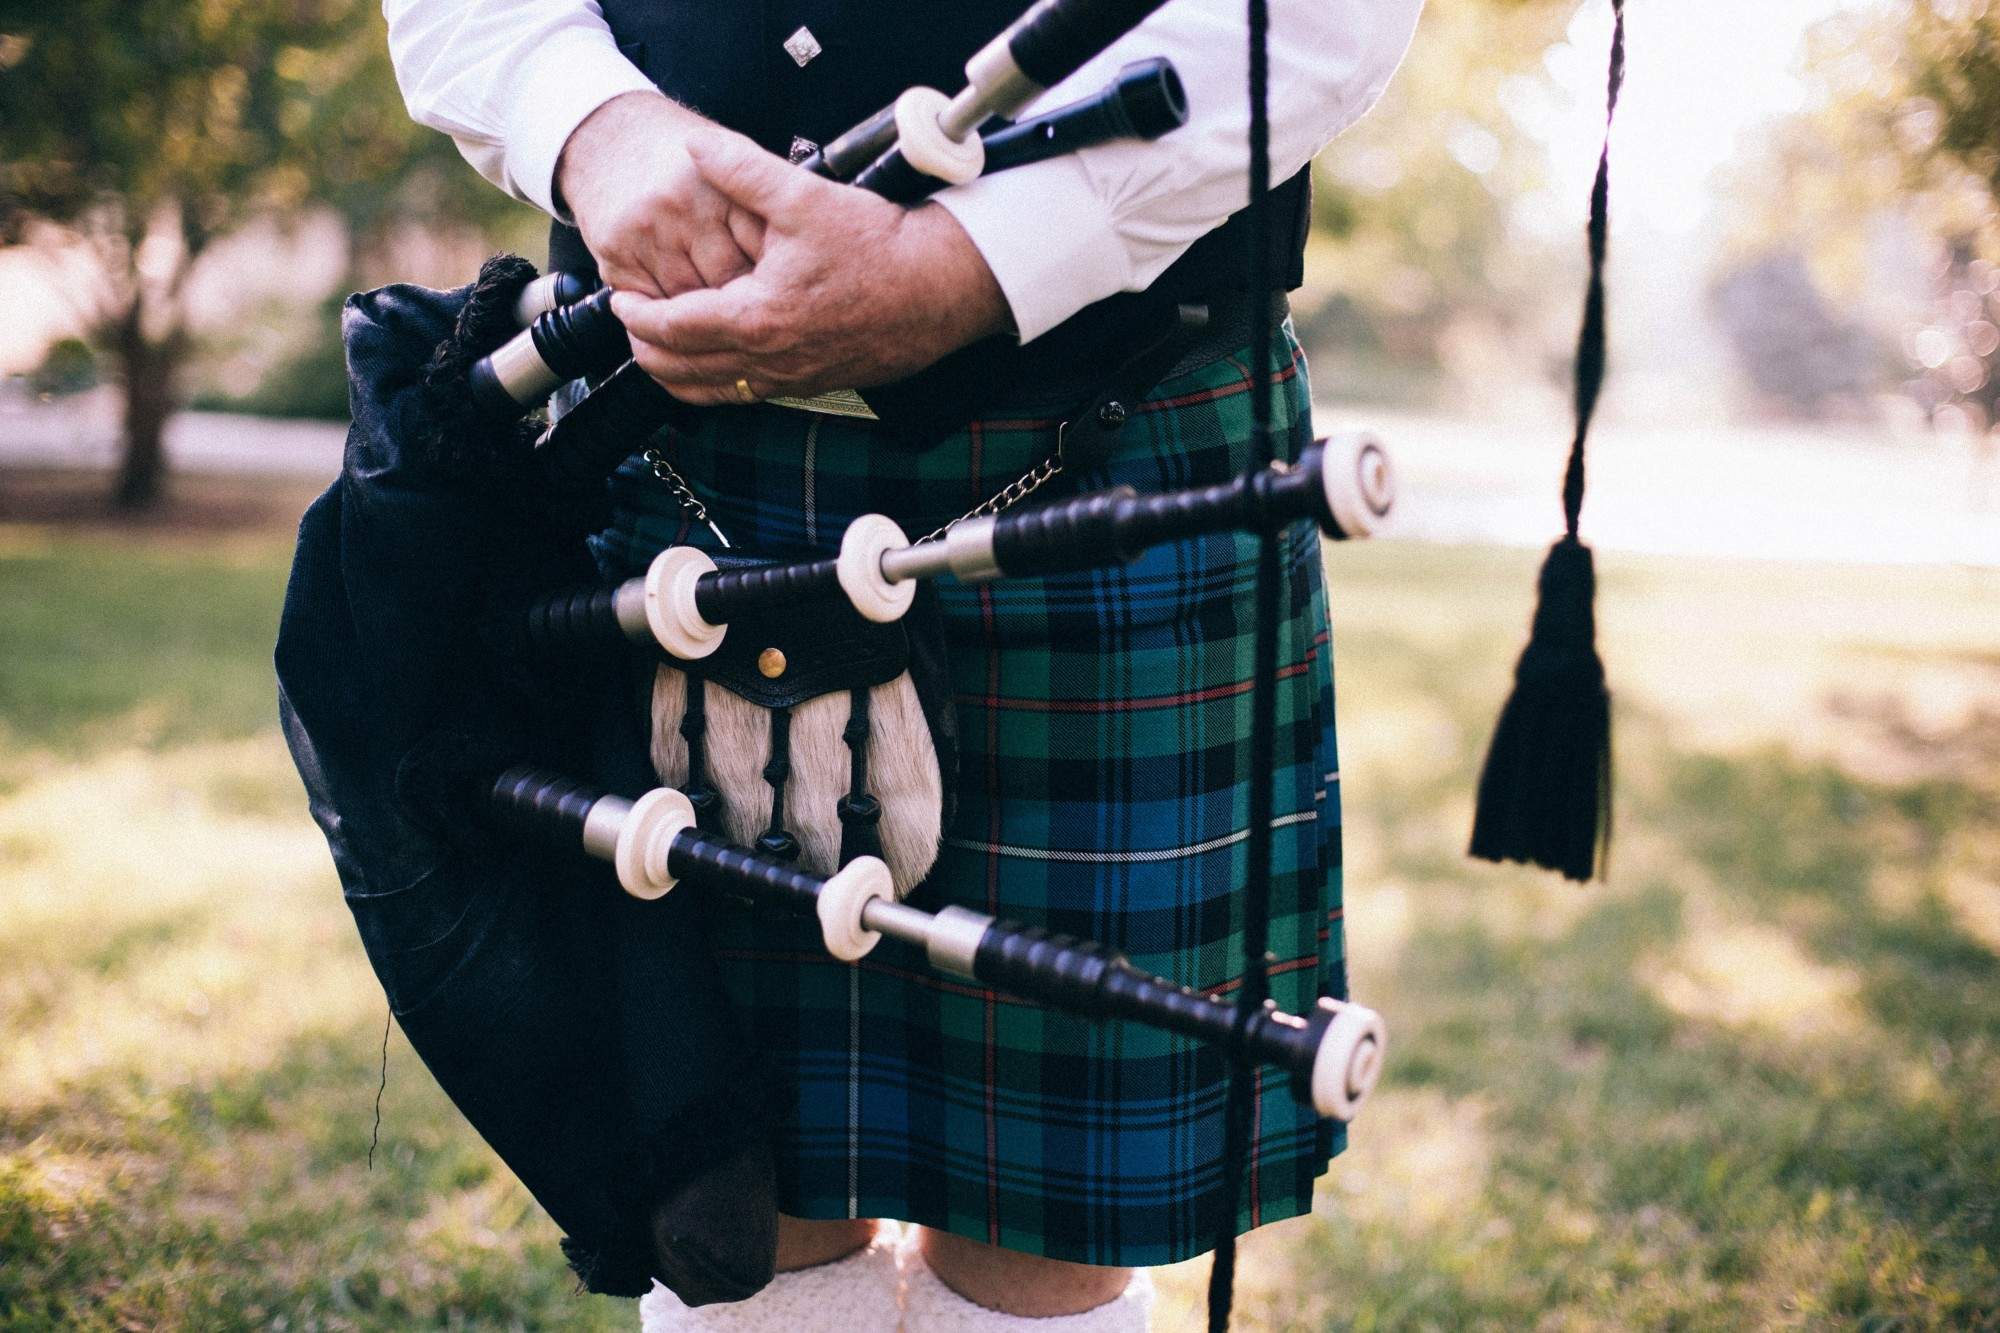 How to Wear a Kilt With Confidence